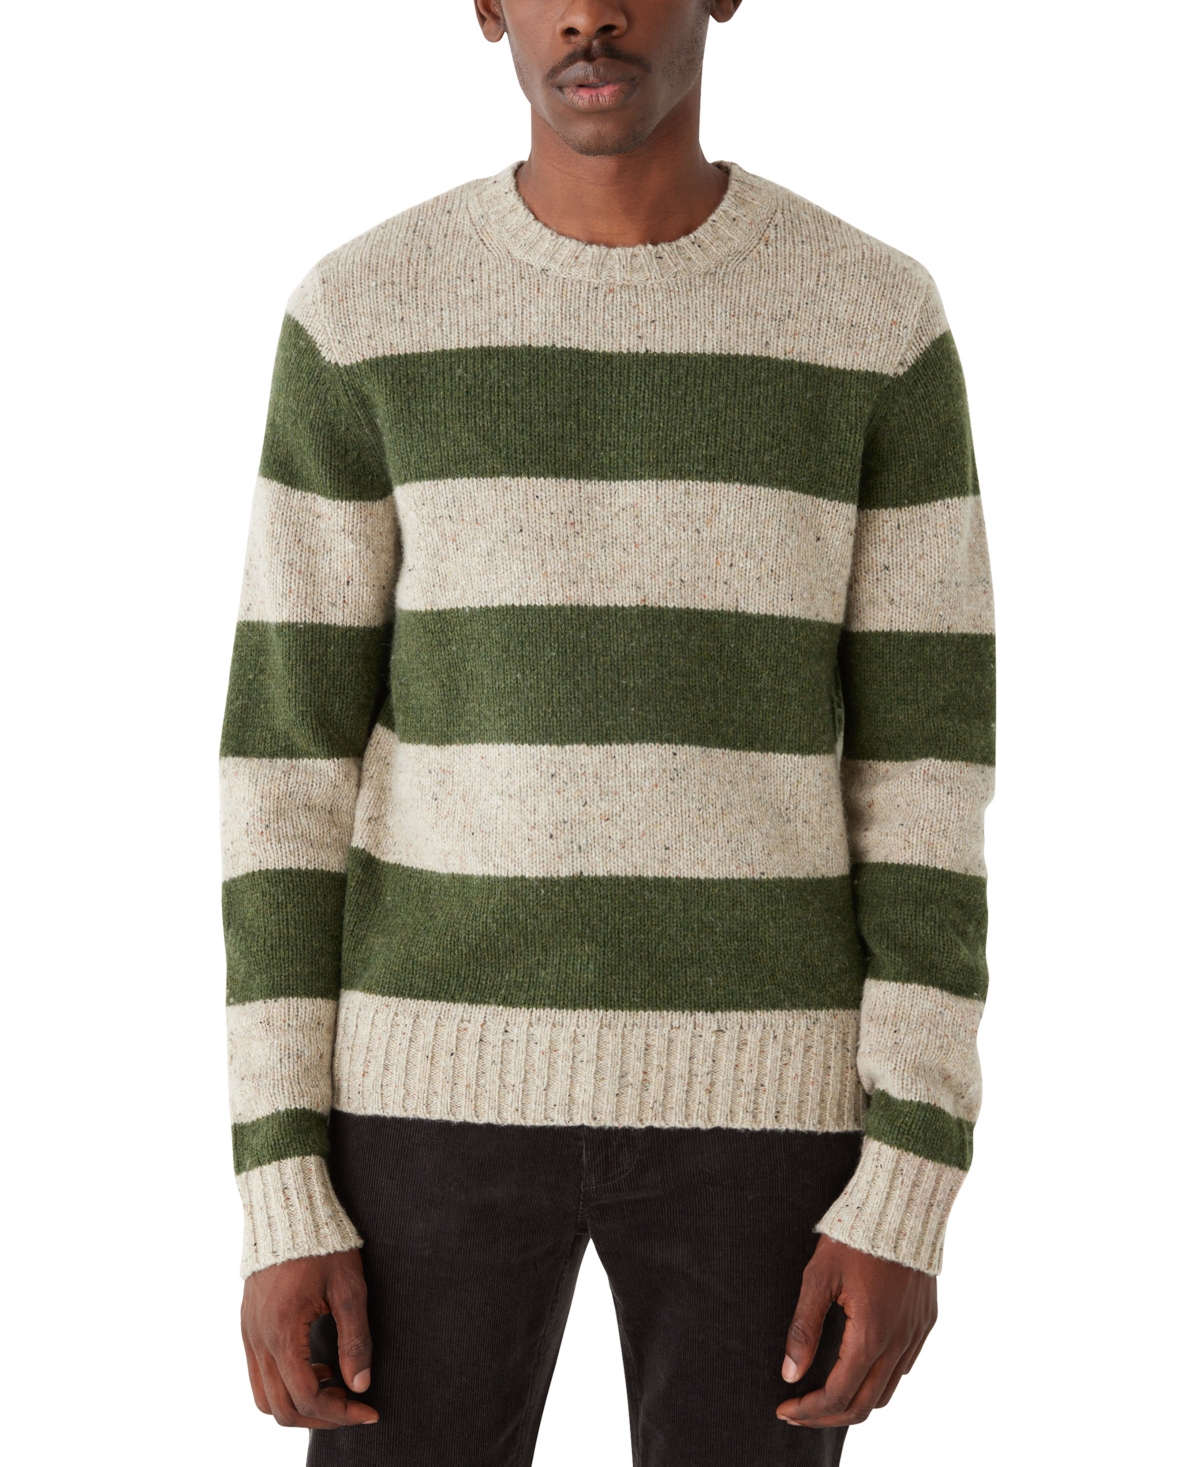 Men's Striped Crewneck Long Sleeve Sweater - Forest